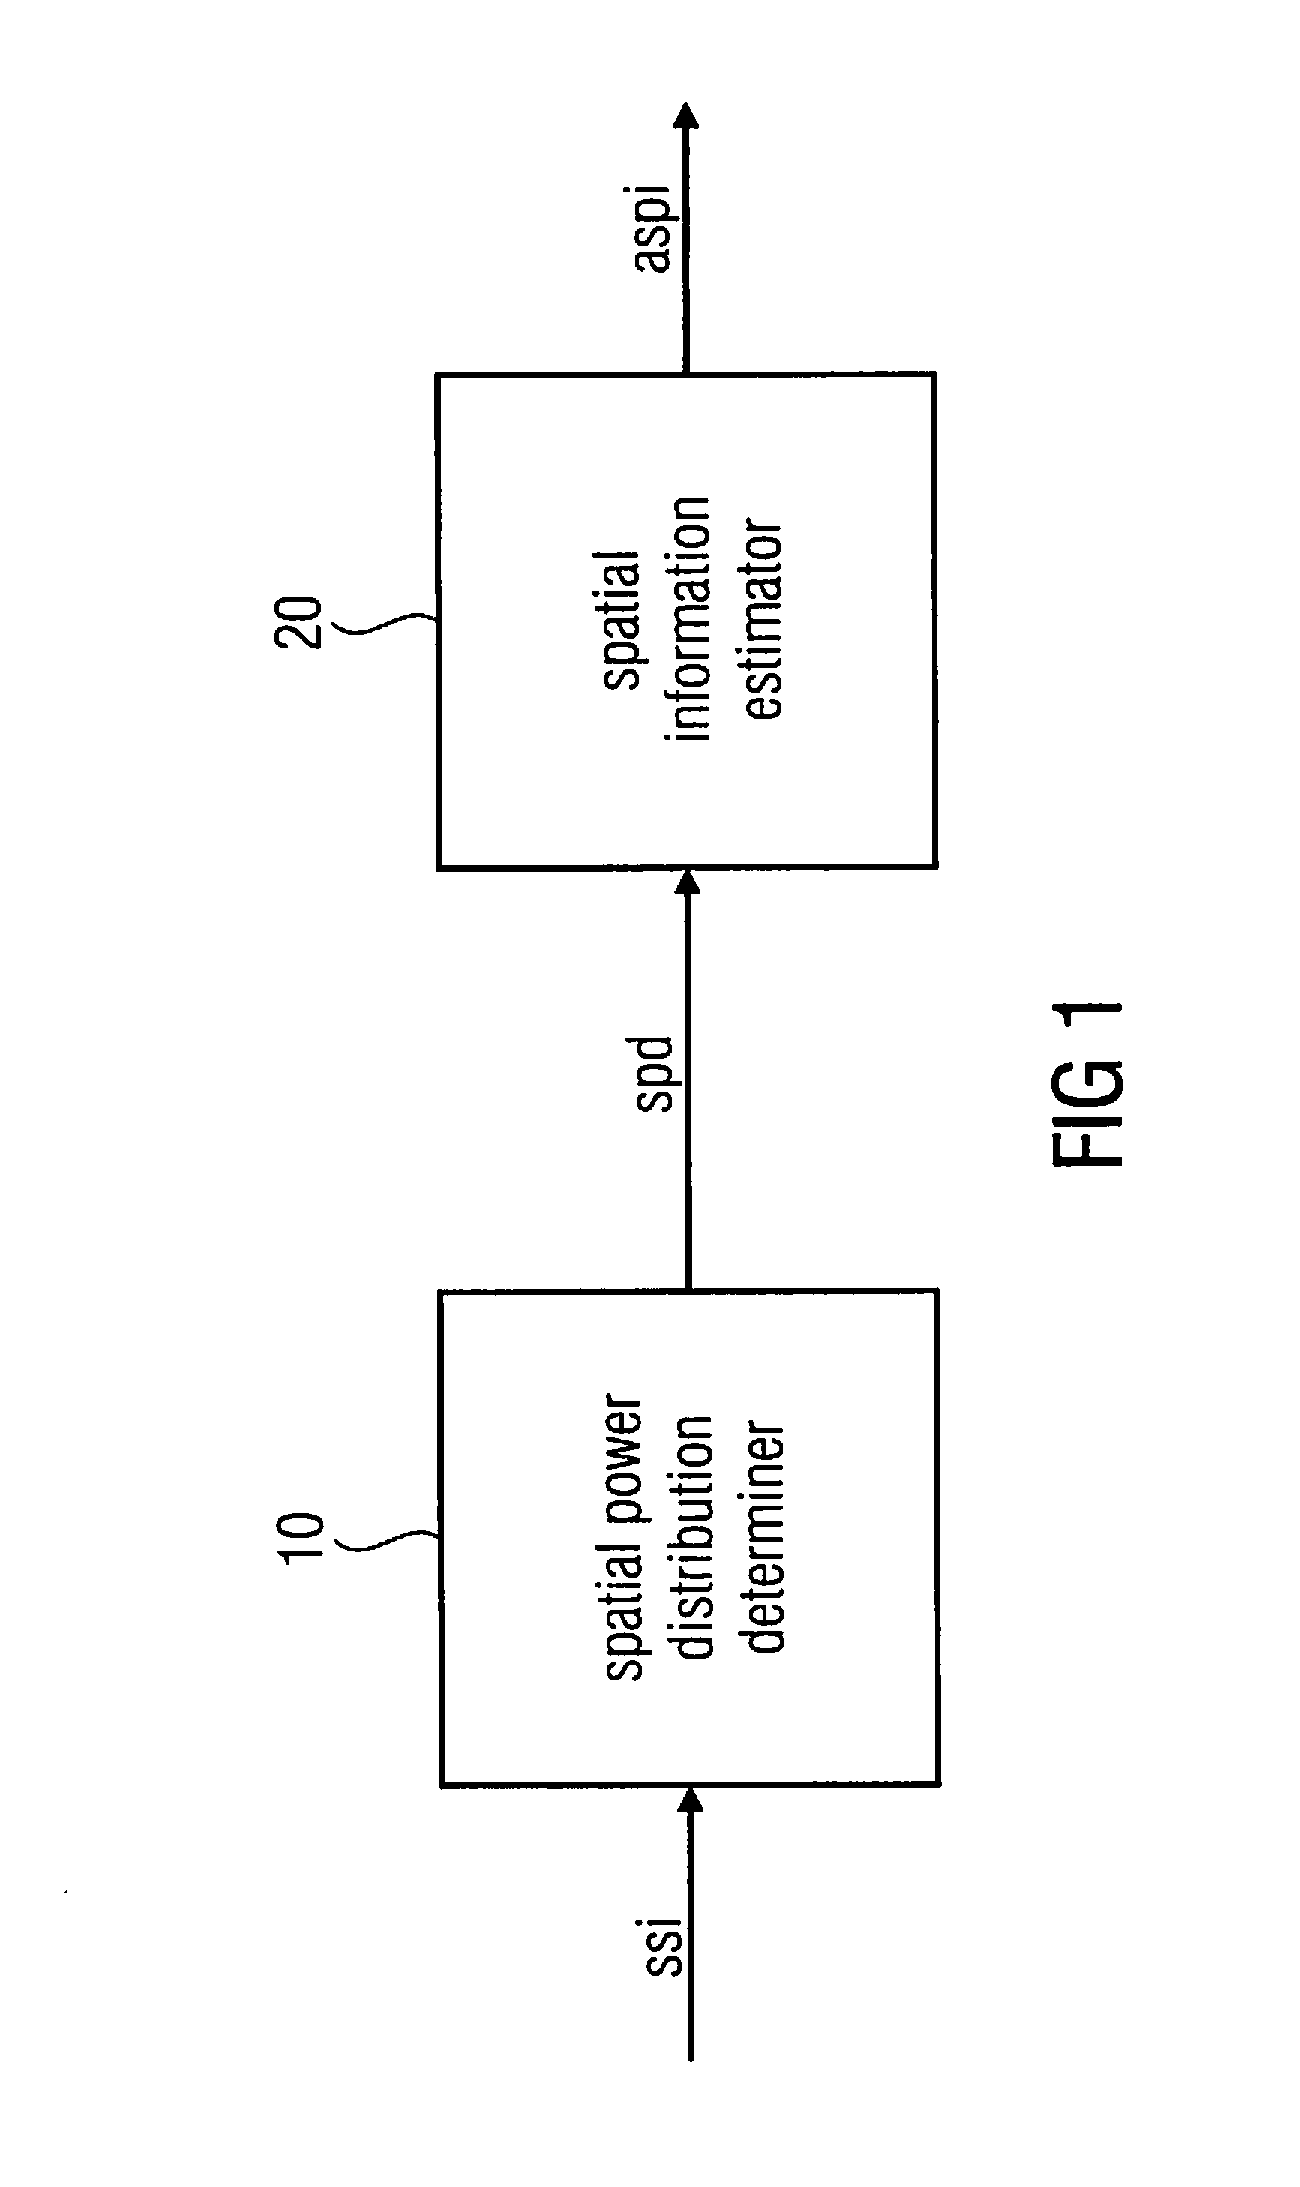 Apparatus and method for microphone positioning based on a spatial power density